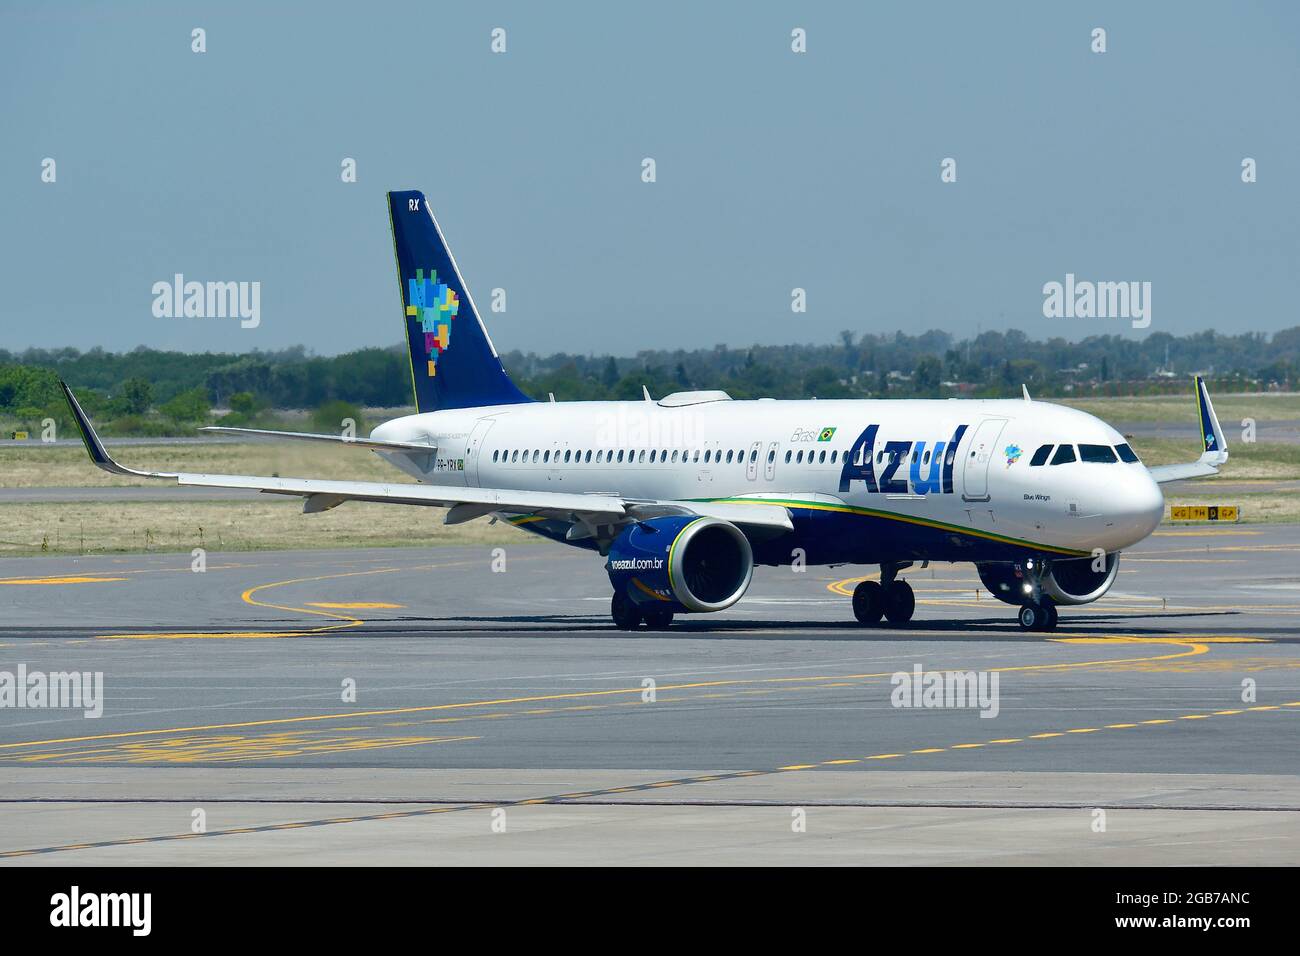 Azul Brazilian Airlines, Airbus A320 neo airplane Stock Photo